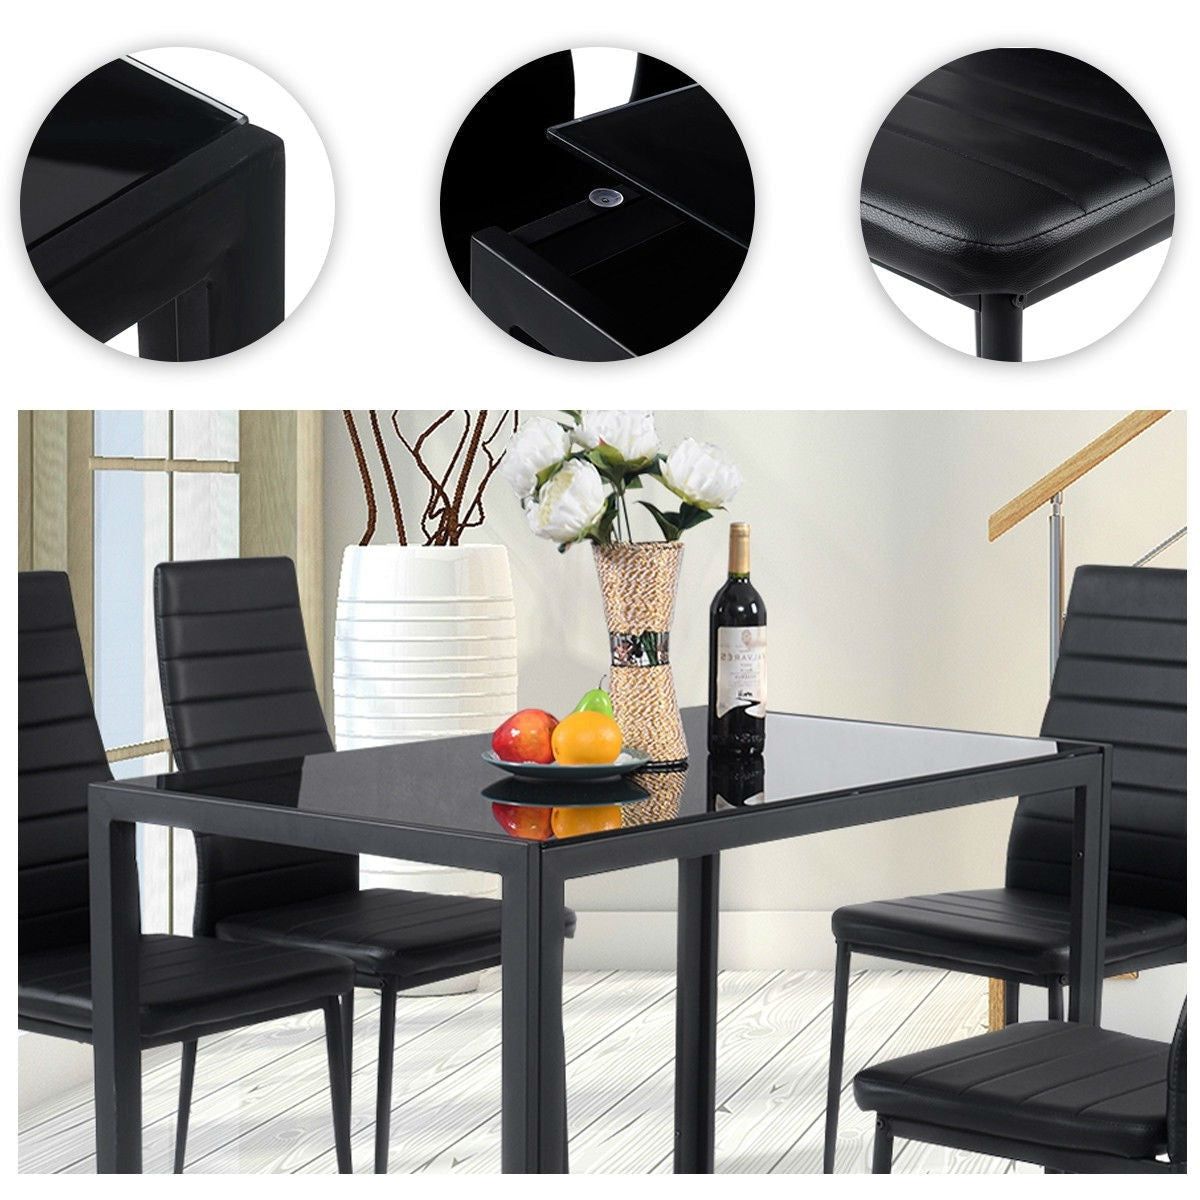 Dining > Dining Sets - 5 Piece Black Glass Tabletop Dining Set With Soft Leather Chairs